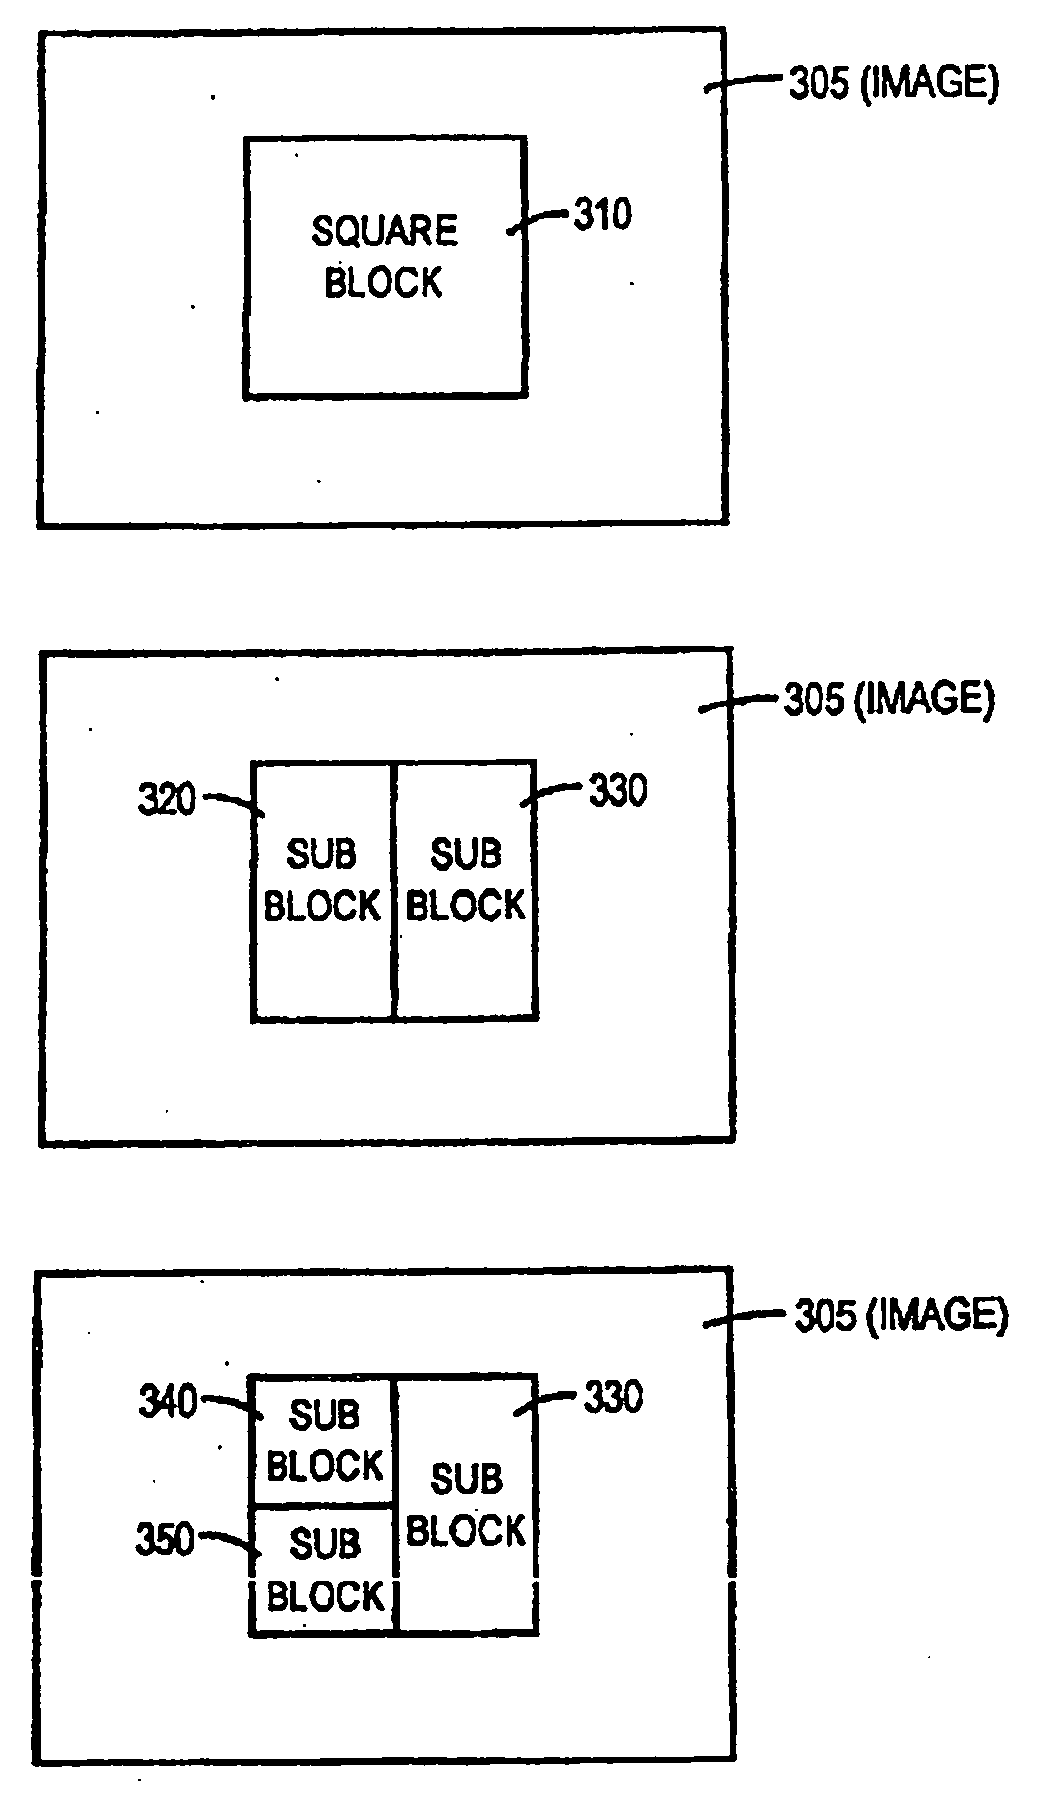 Process and device for the compression of portions of images